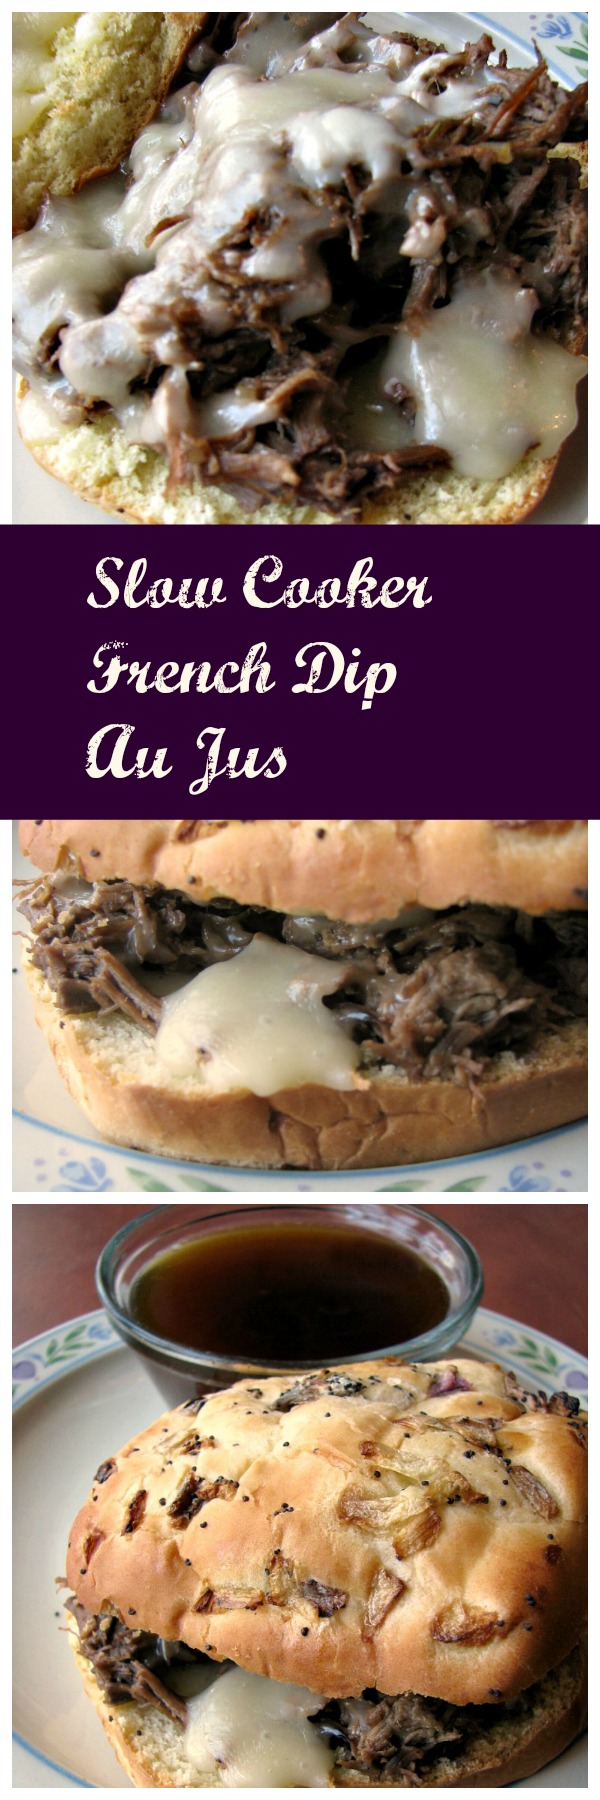 The classic recipe made easy! This Slow Cooker French Dip Au Jus takes just a few minutes to prepare, and is full of flavor. Grown-ups and kids will love this classic sandwich made at home!